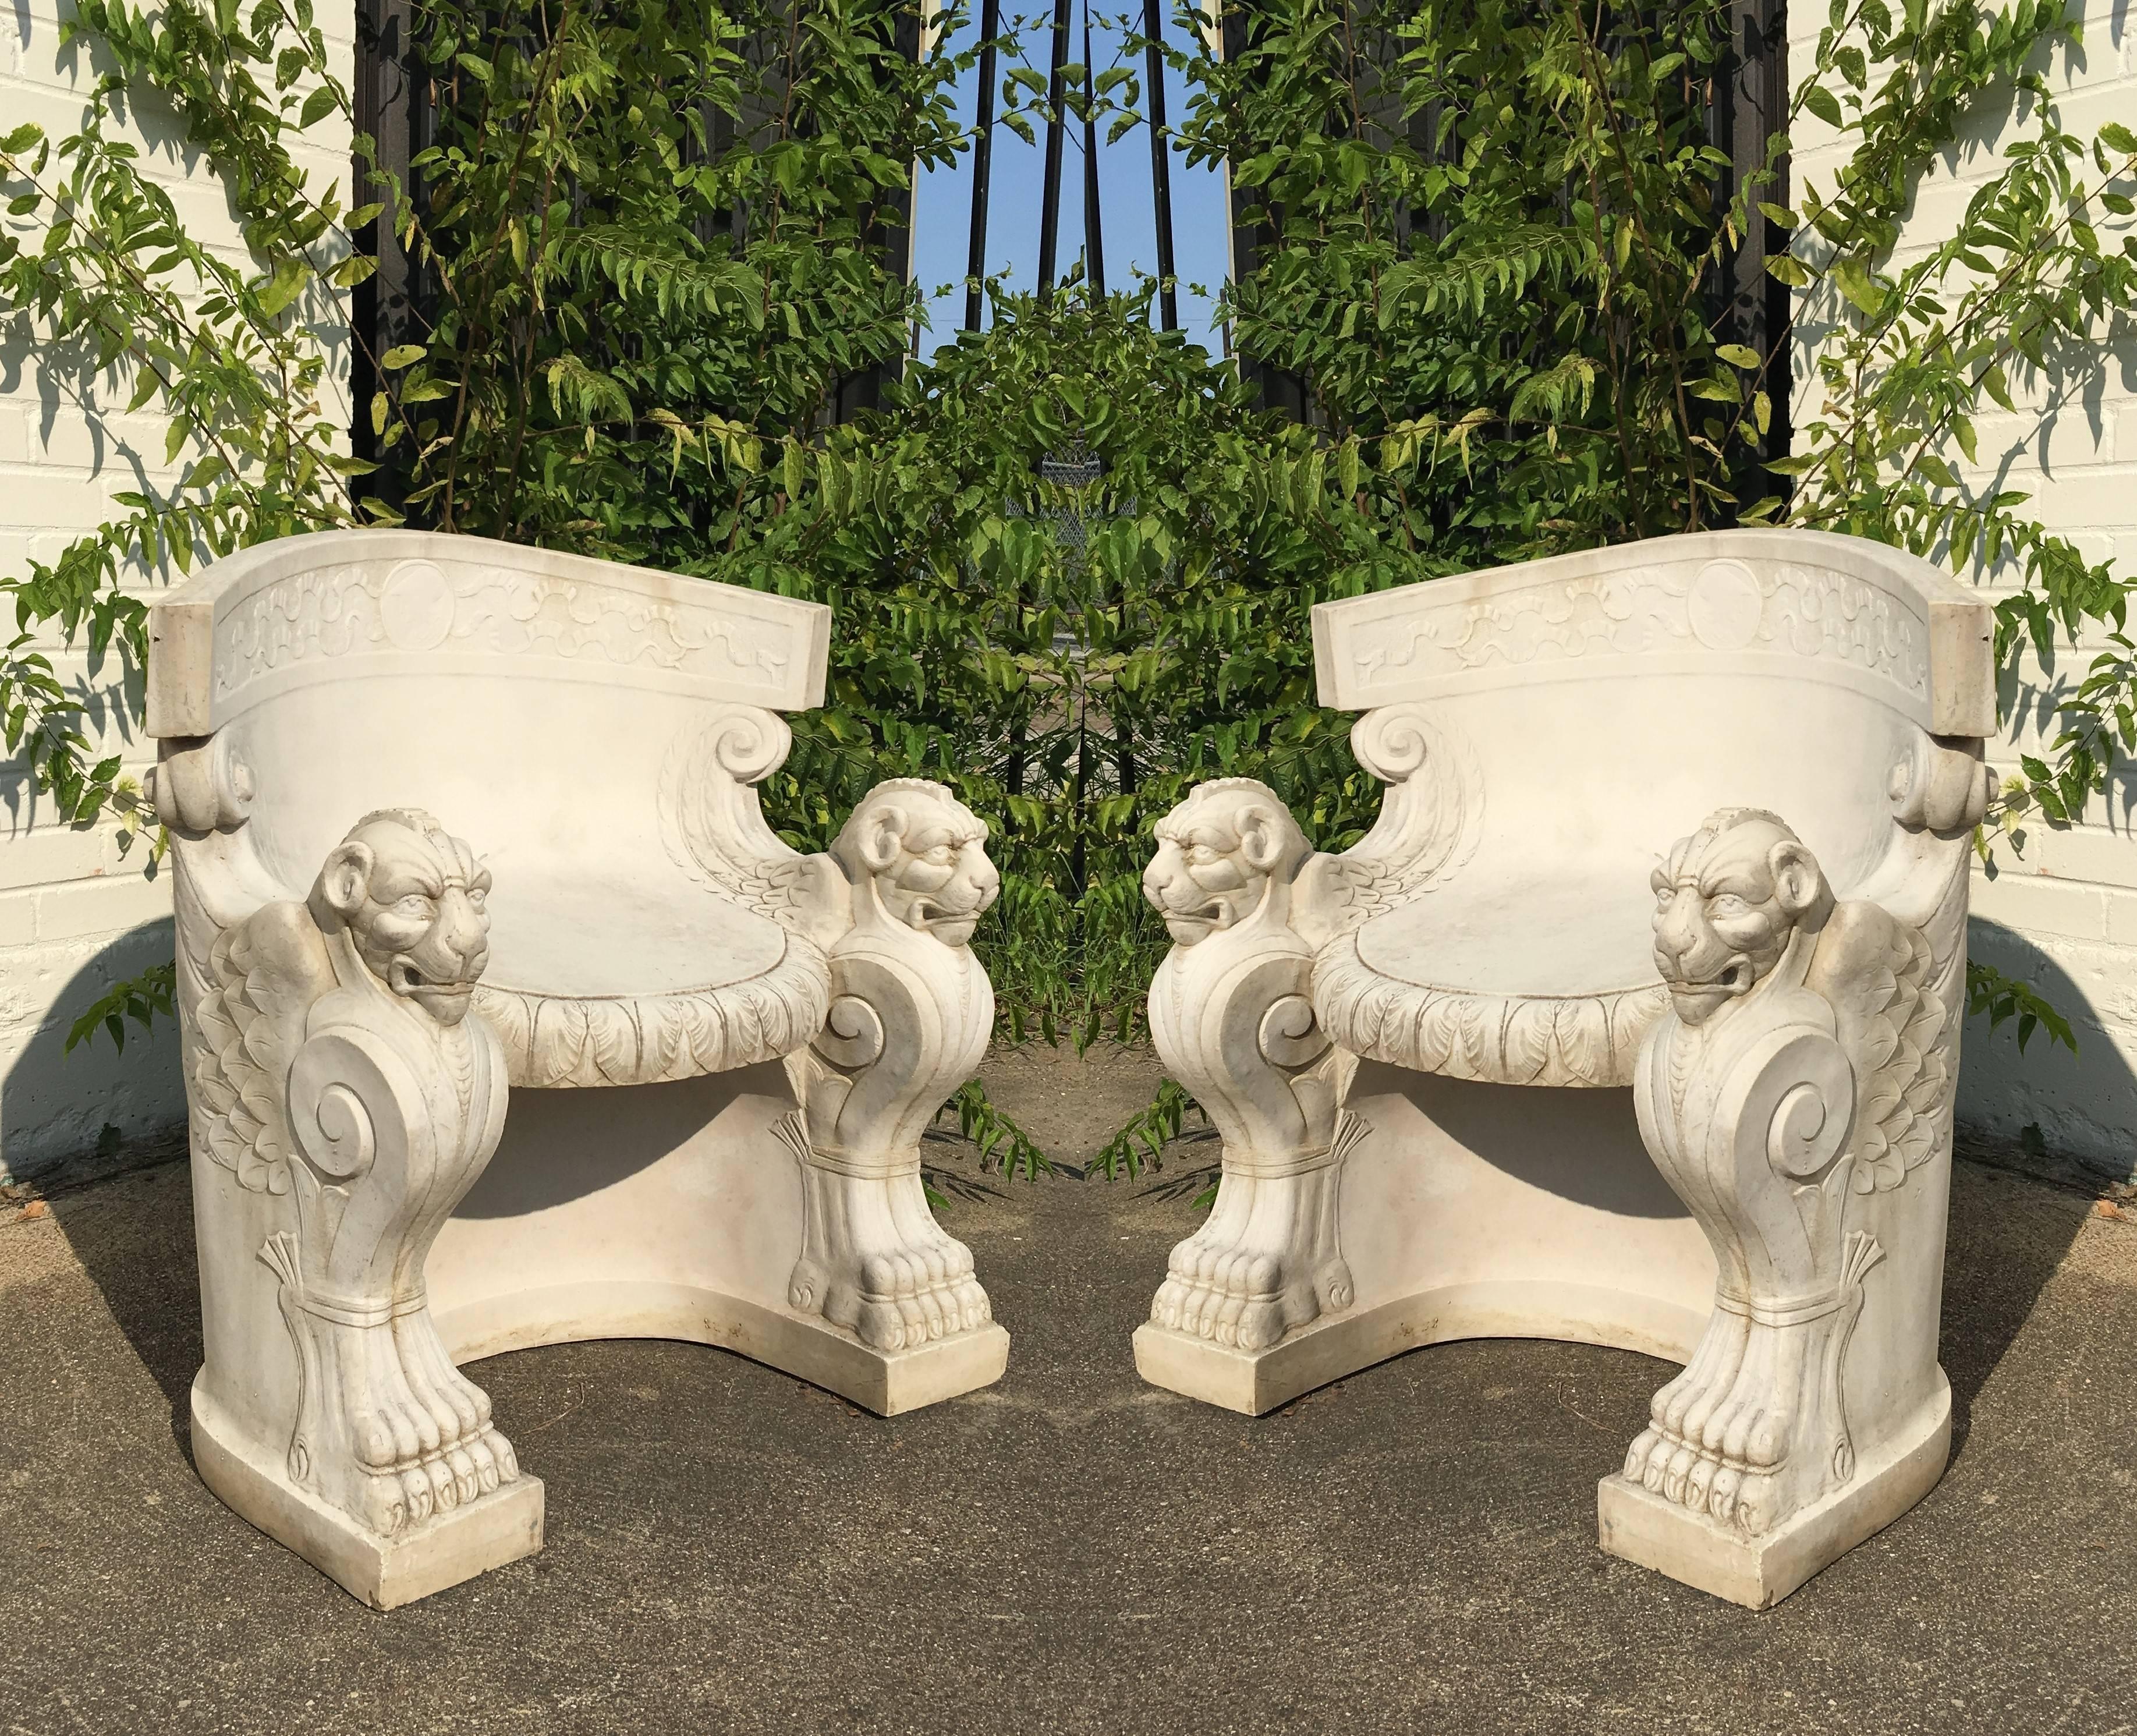 Pair of rare figural cast stone tub chairs. Wonderfully winged lion type figures with both carved heads and bodies.